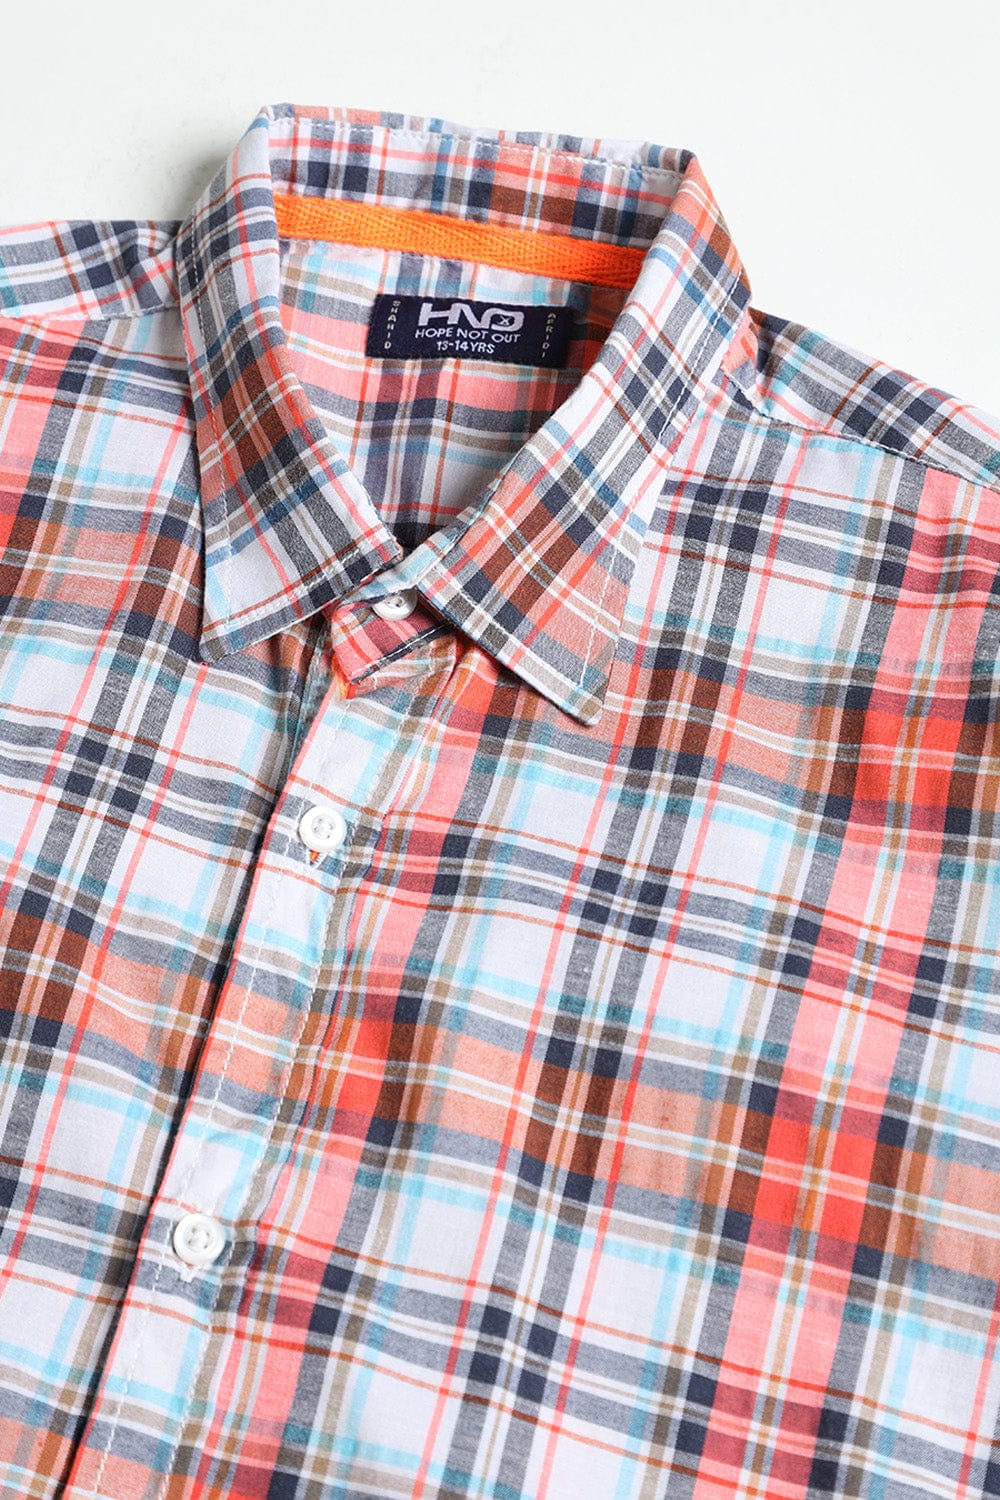 Hope Not Out by Shahid Afridi Boys Casual Shirt Smart Oxford Check Casual Shirt for Boys